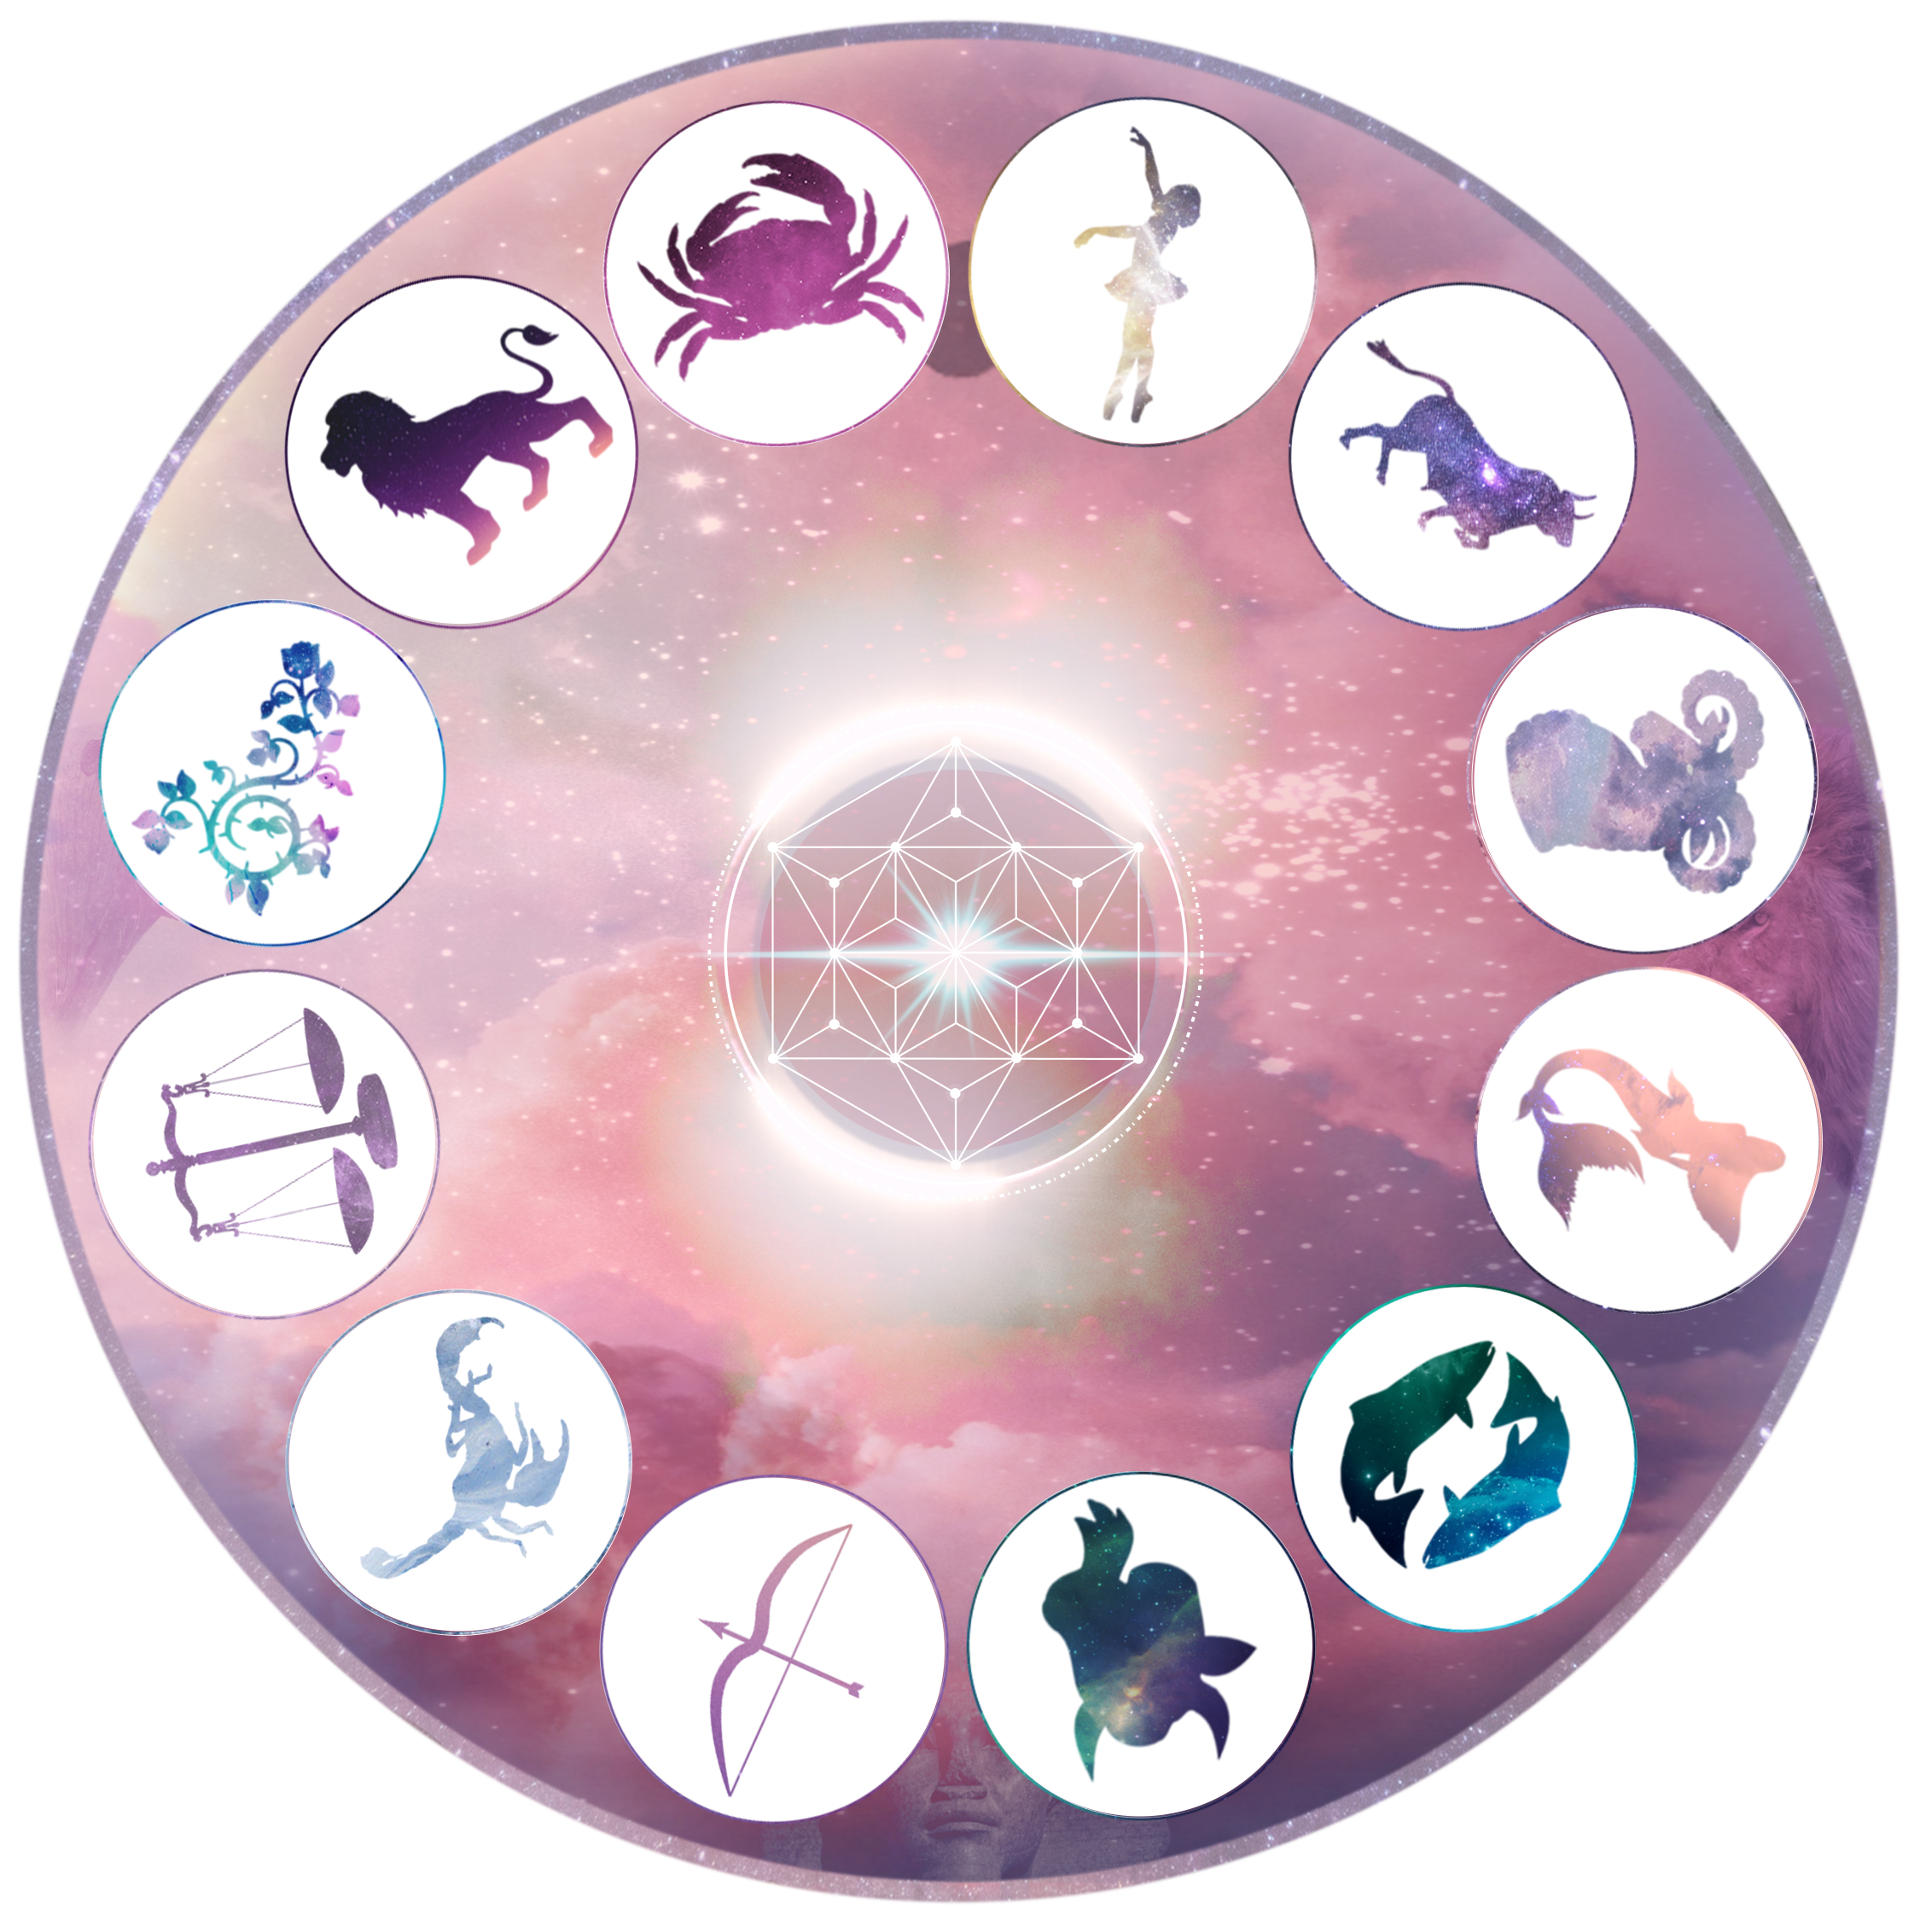 A cosmic wheel with zodiac signs